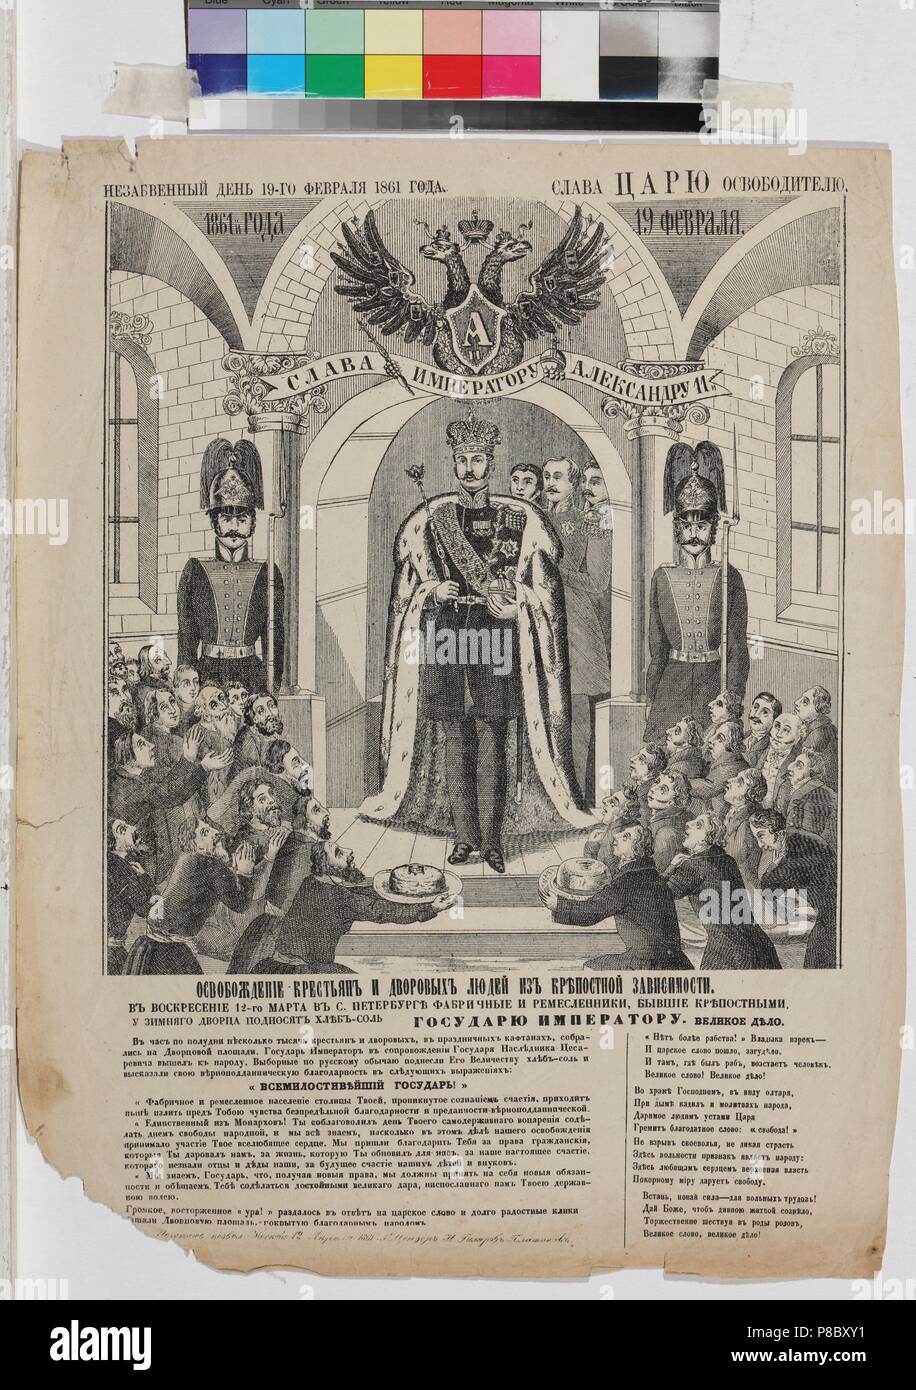 The Emancipation of the serfs on 1861. Museum: I. Turgenev Memorial Museum, Moscow. Stock Photo